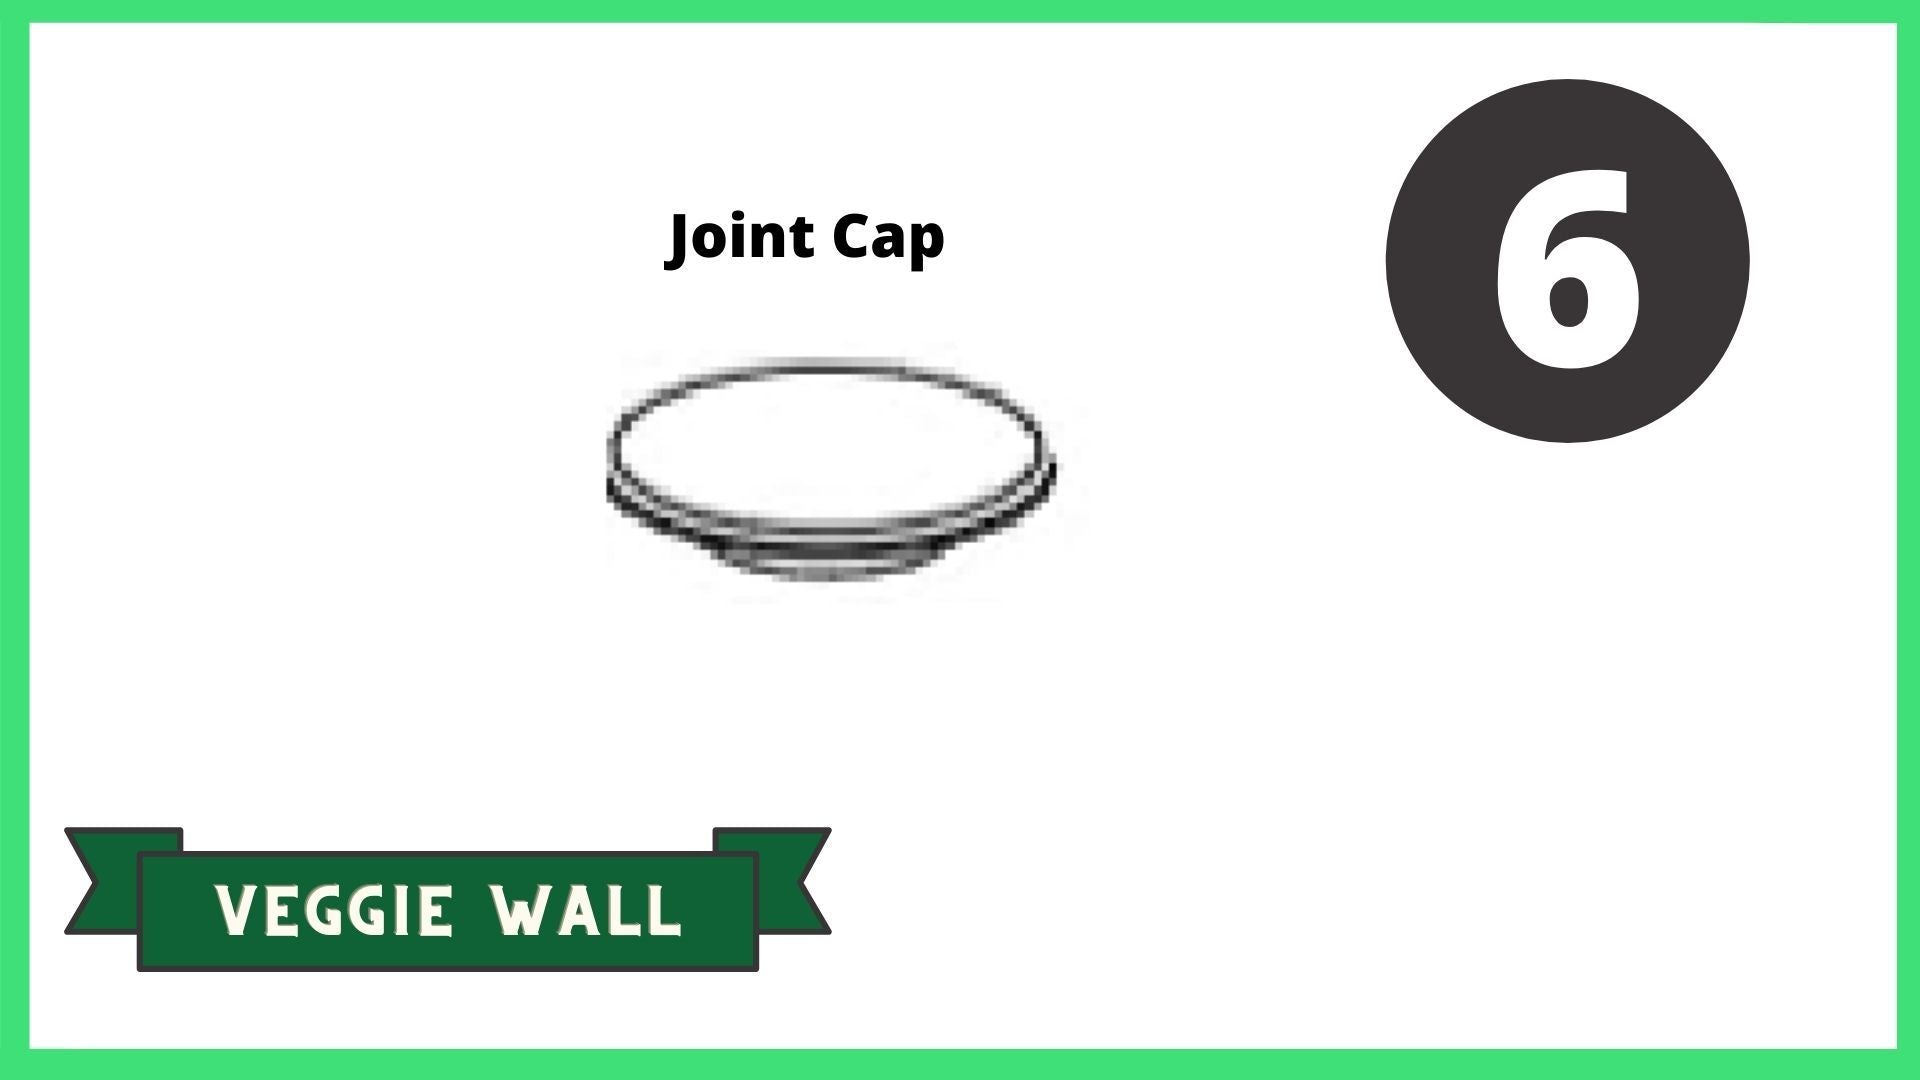 REPLACEMENT PARTS for: Stack & Extend Veggie Wall Kits